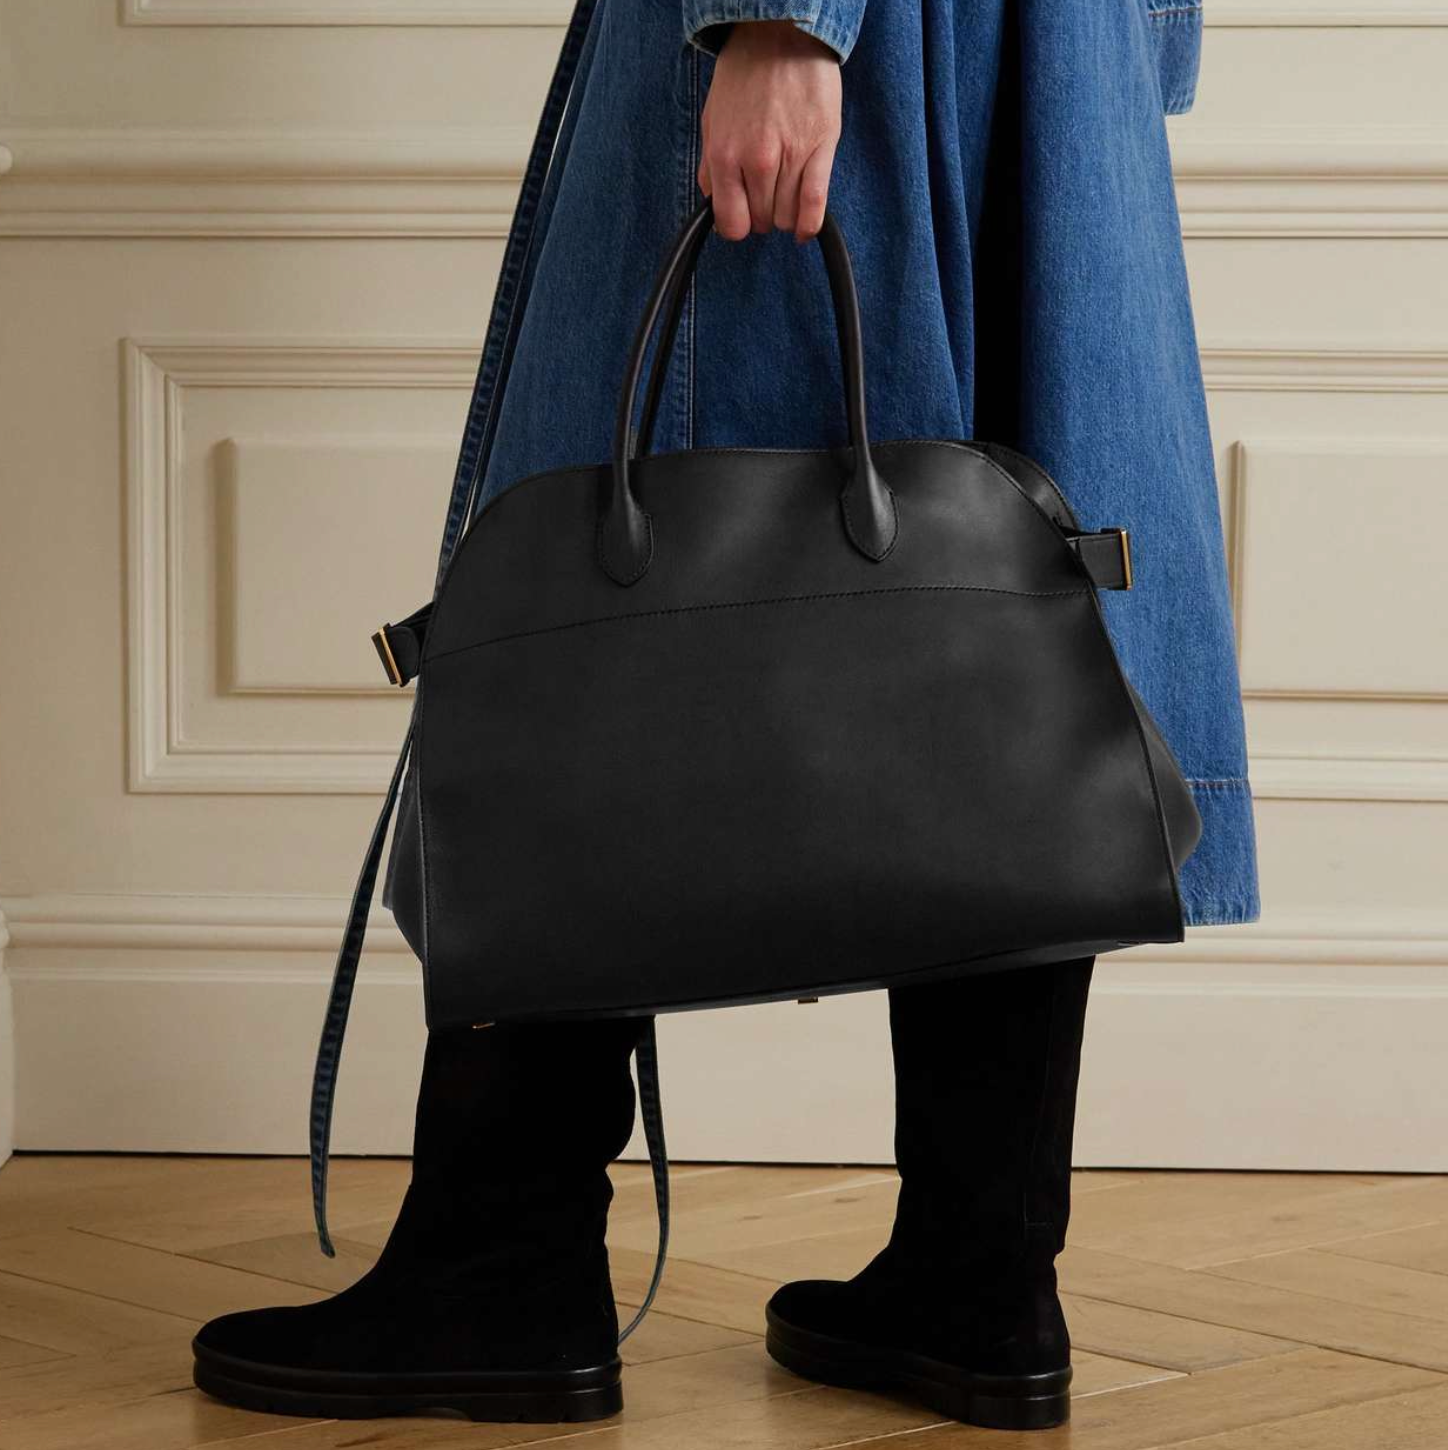 The Row Margaux 15 Top-Handle Bag in Suede